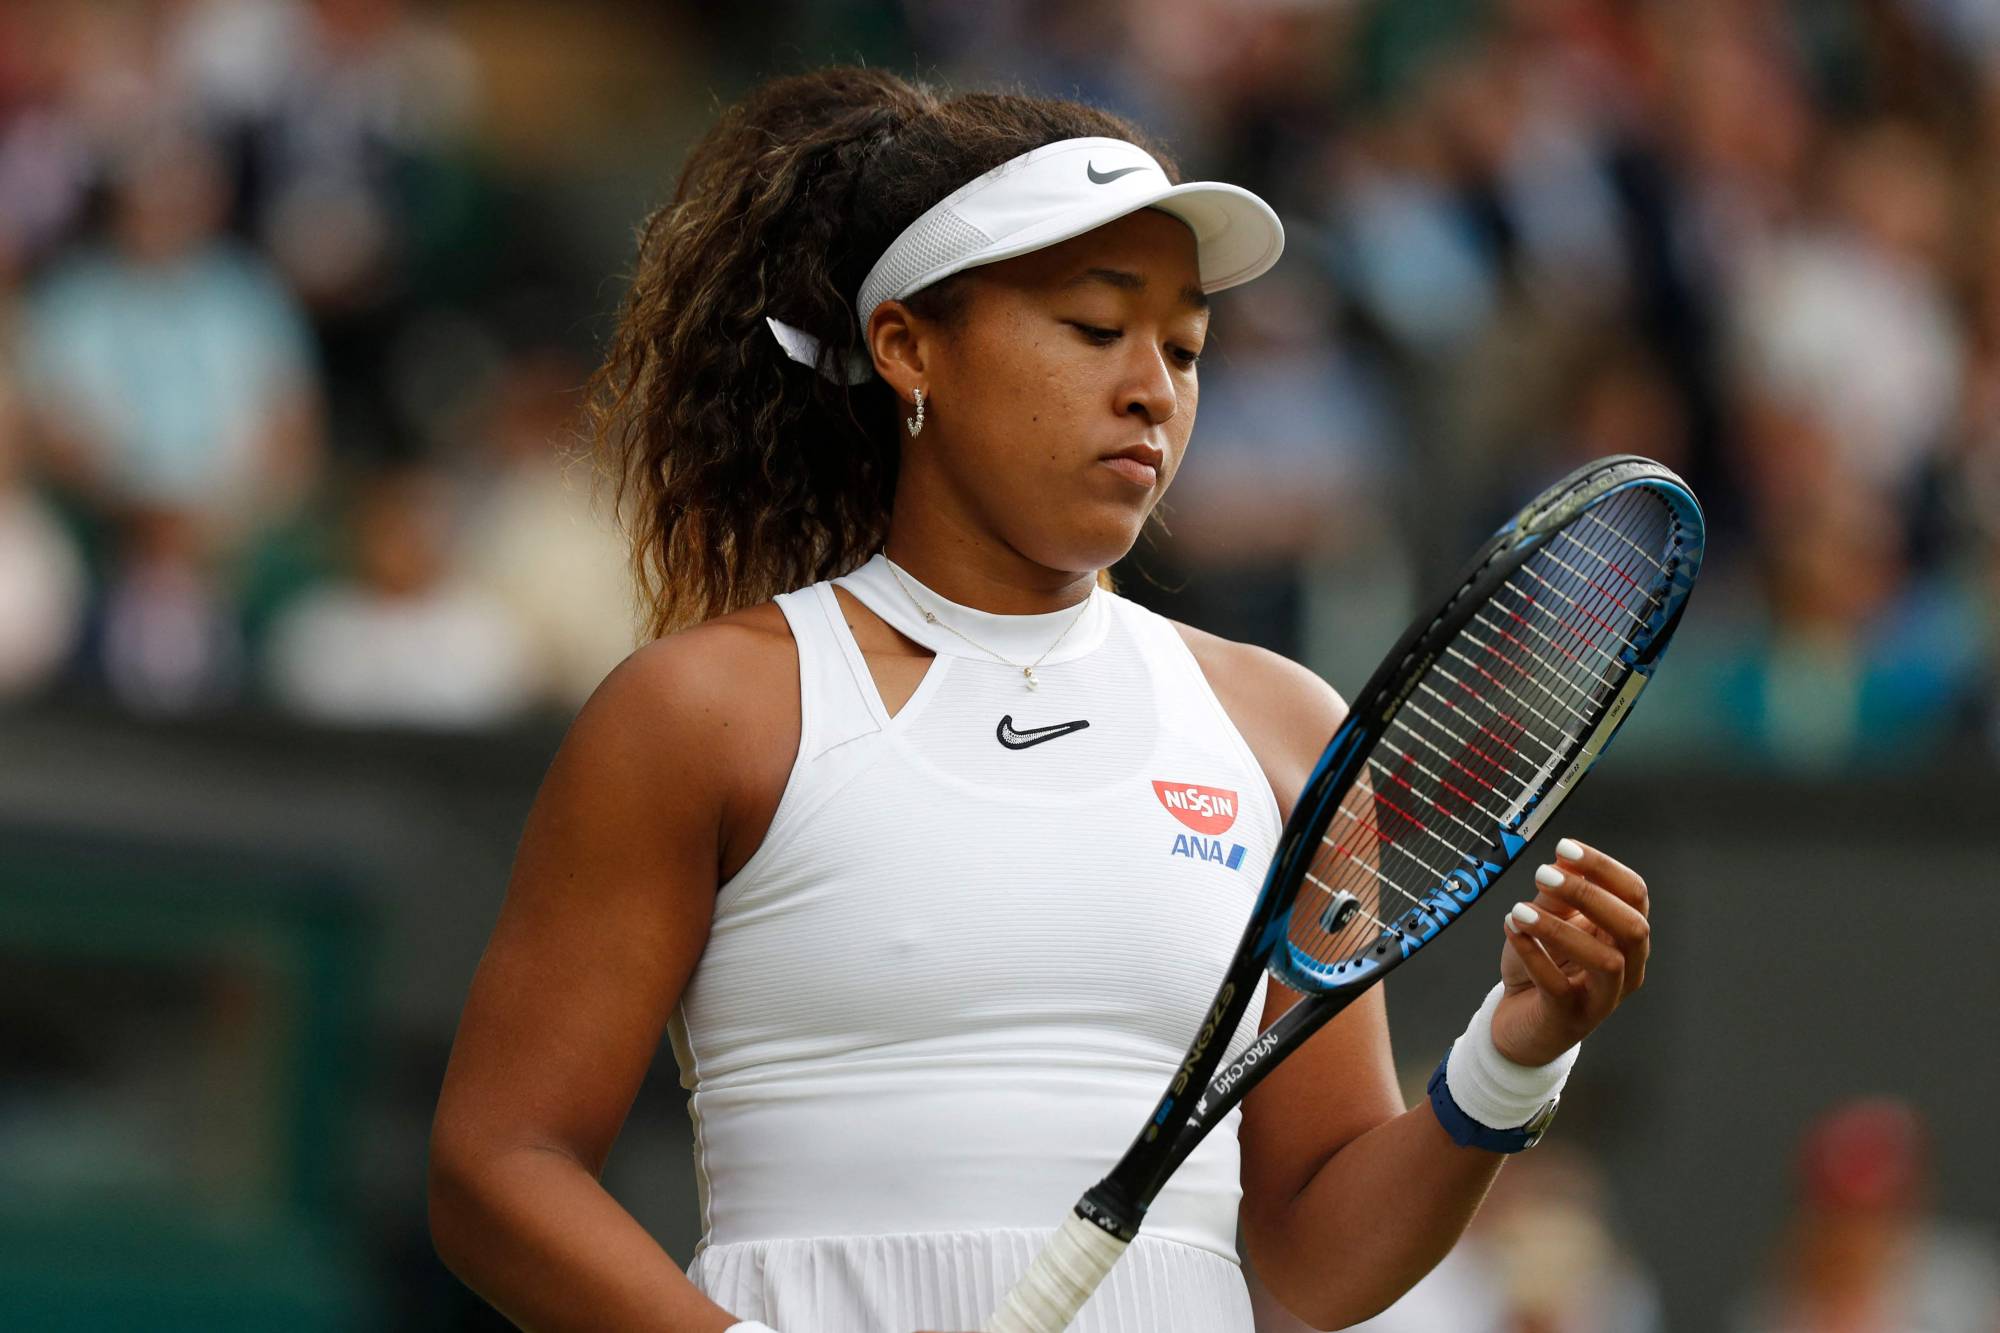 Naomi Osaka's Nike Star Power Continues To Shine With New Apparel Line